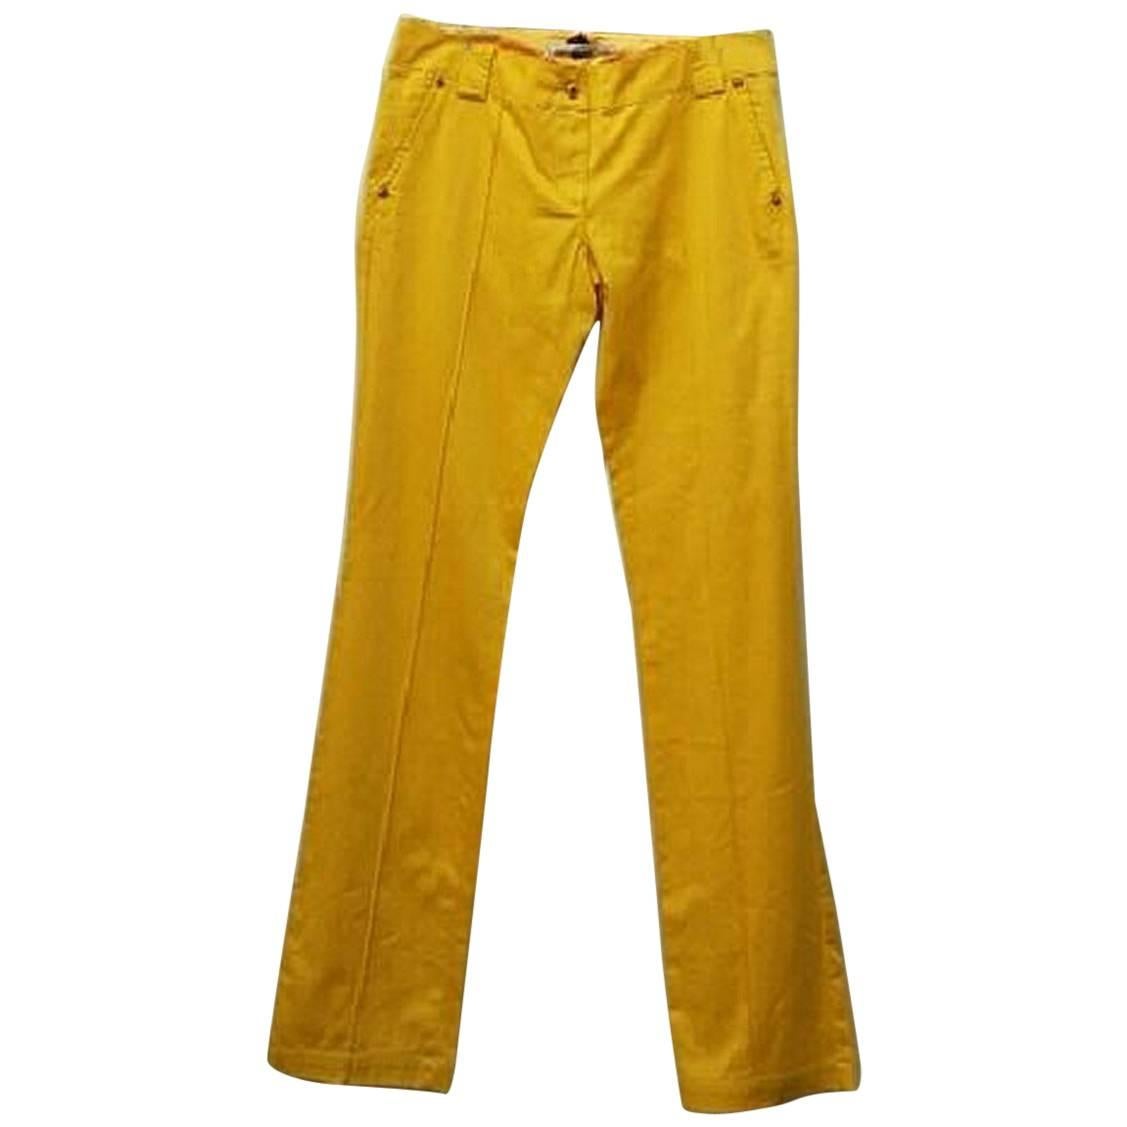 Roberto Cavalli Casual Trousers Pants - Size: 12 (L, 32, 33)